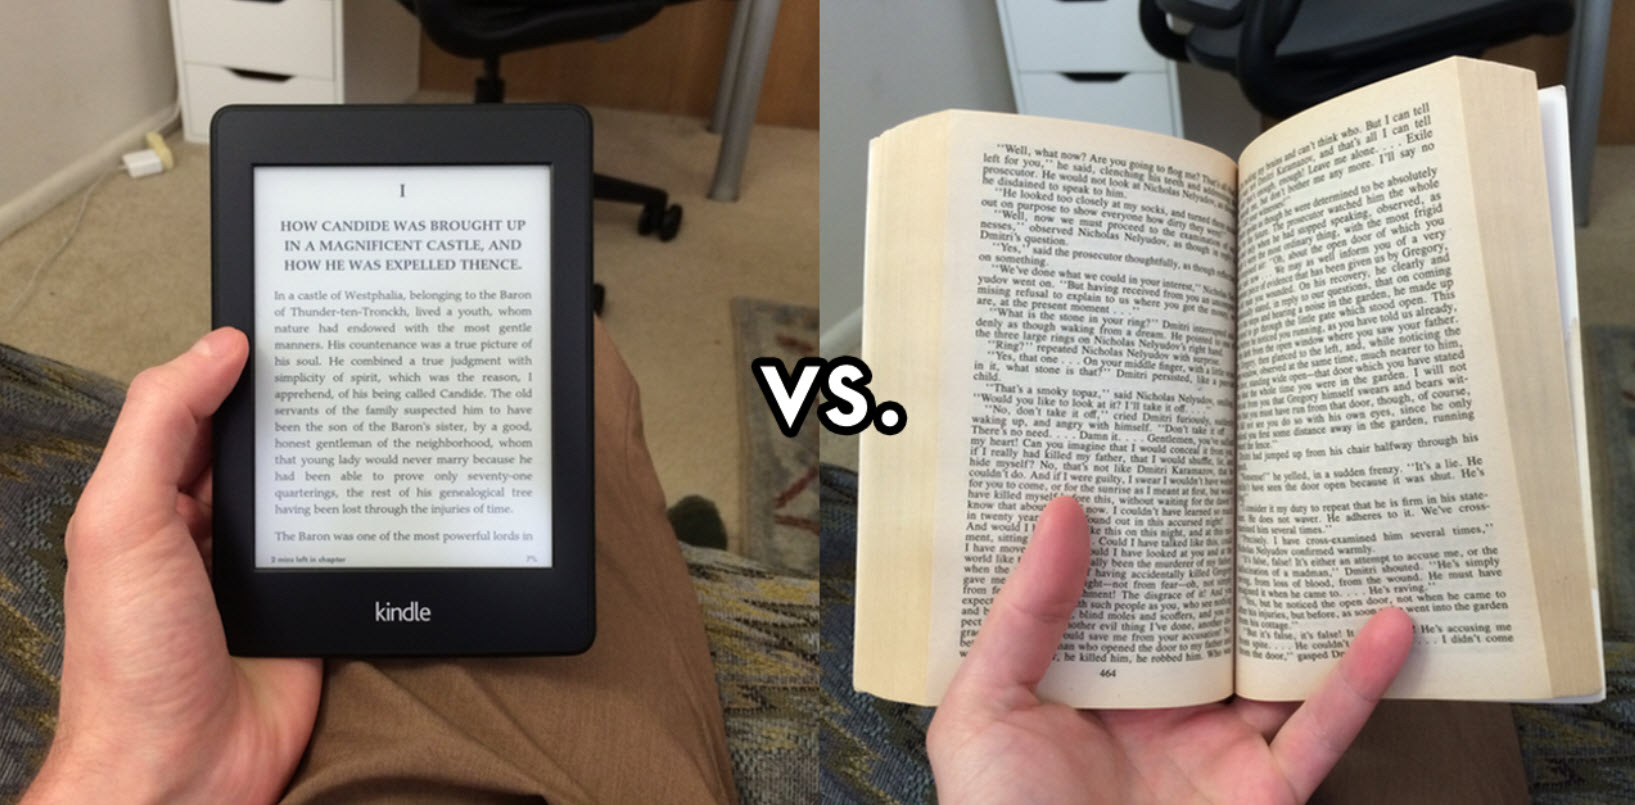 physical books are better than e-books torrent